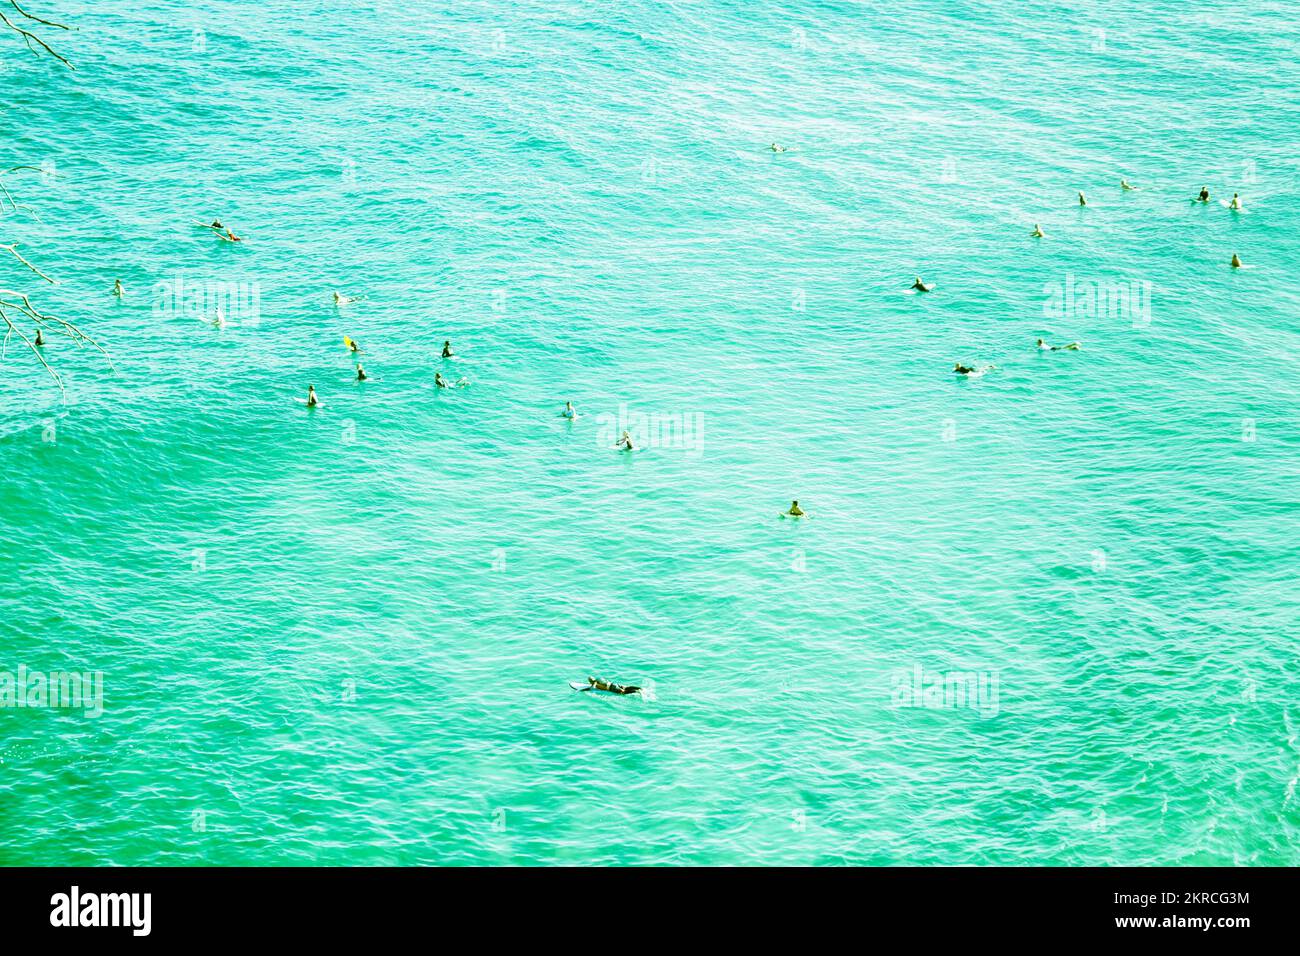 Aquatic blue lifestyle photo on a wave of surfers at tropical island location. Taken: Main Beach, Point Lookout, North Stradbroke Island, Queensland, Stock Photo